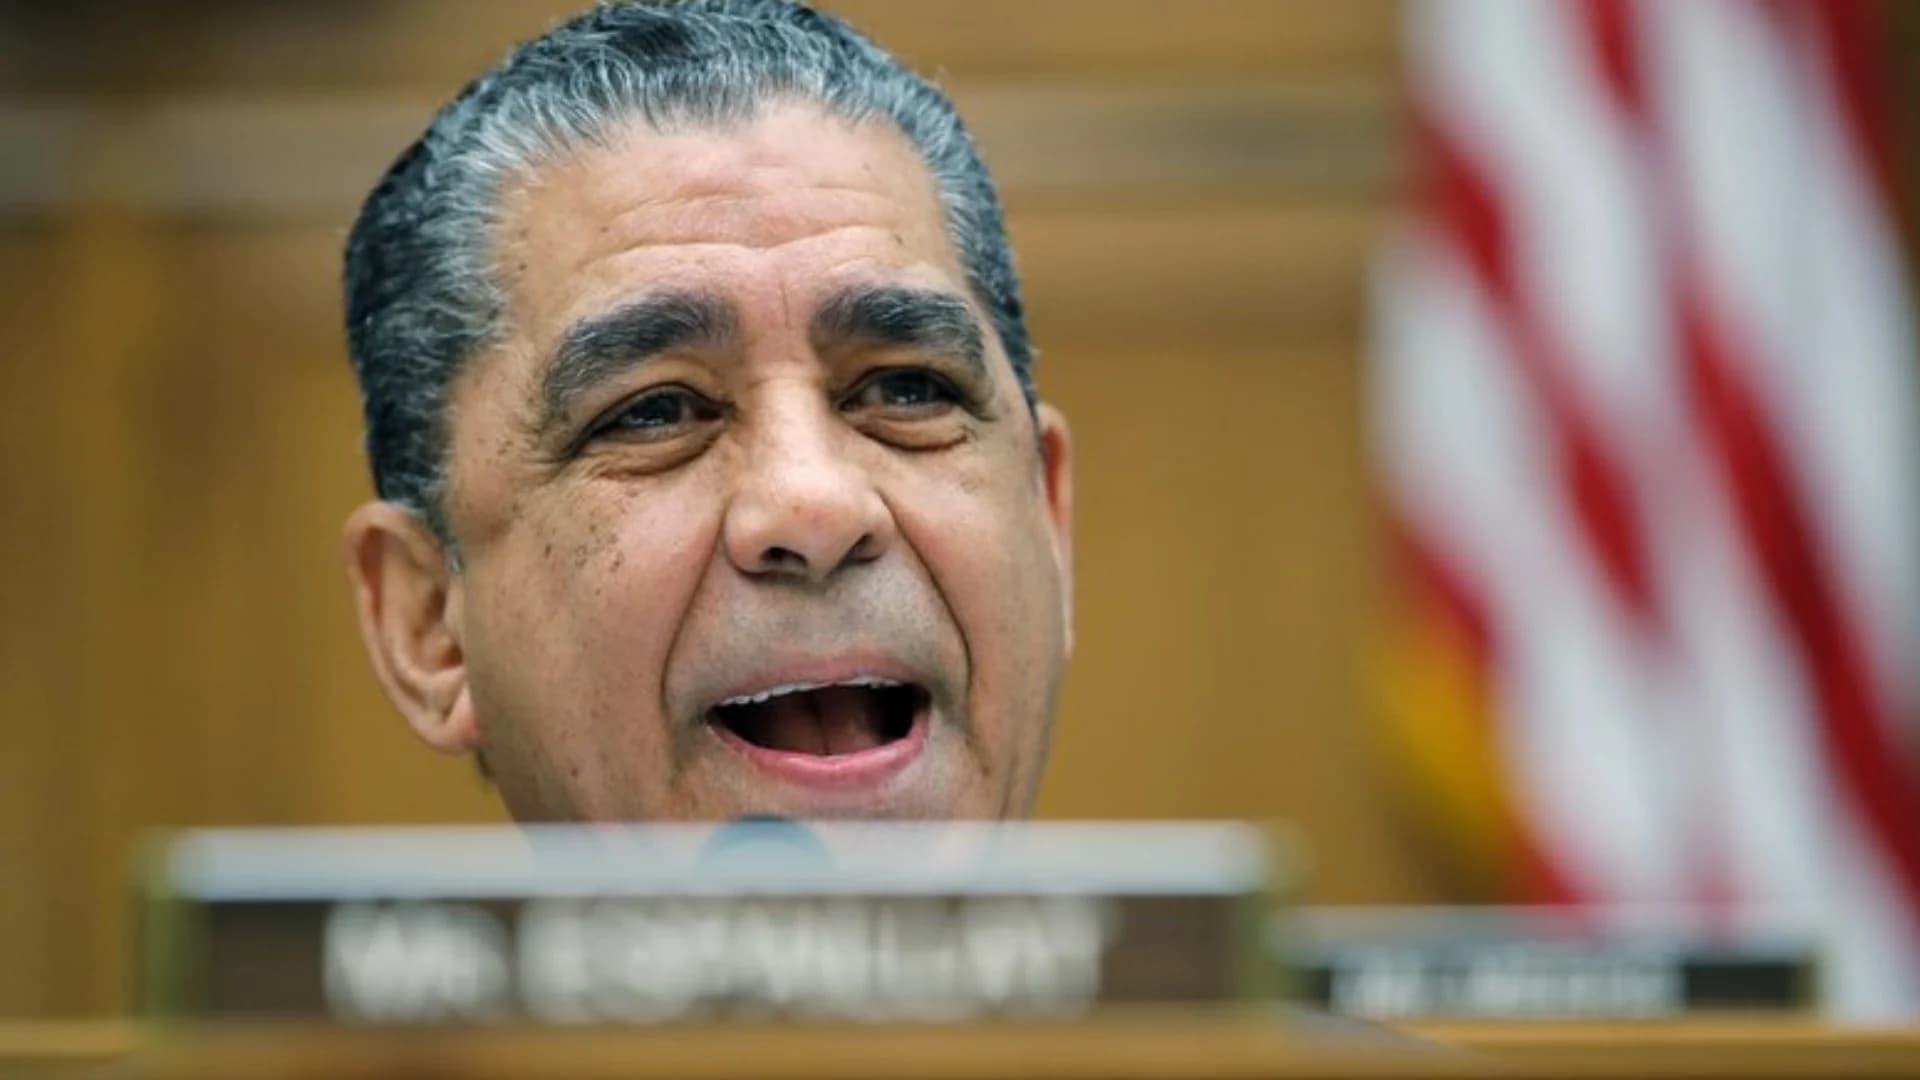 NY Rep. Espaillat to work from home after testing positive for COVID-19